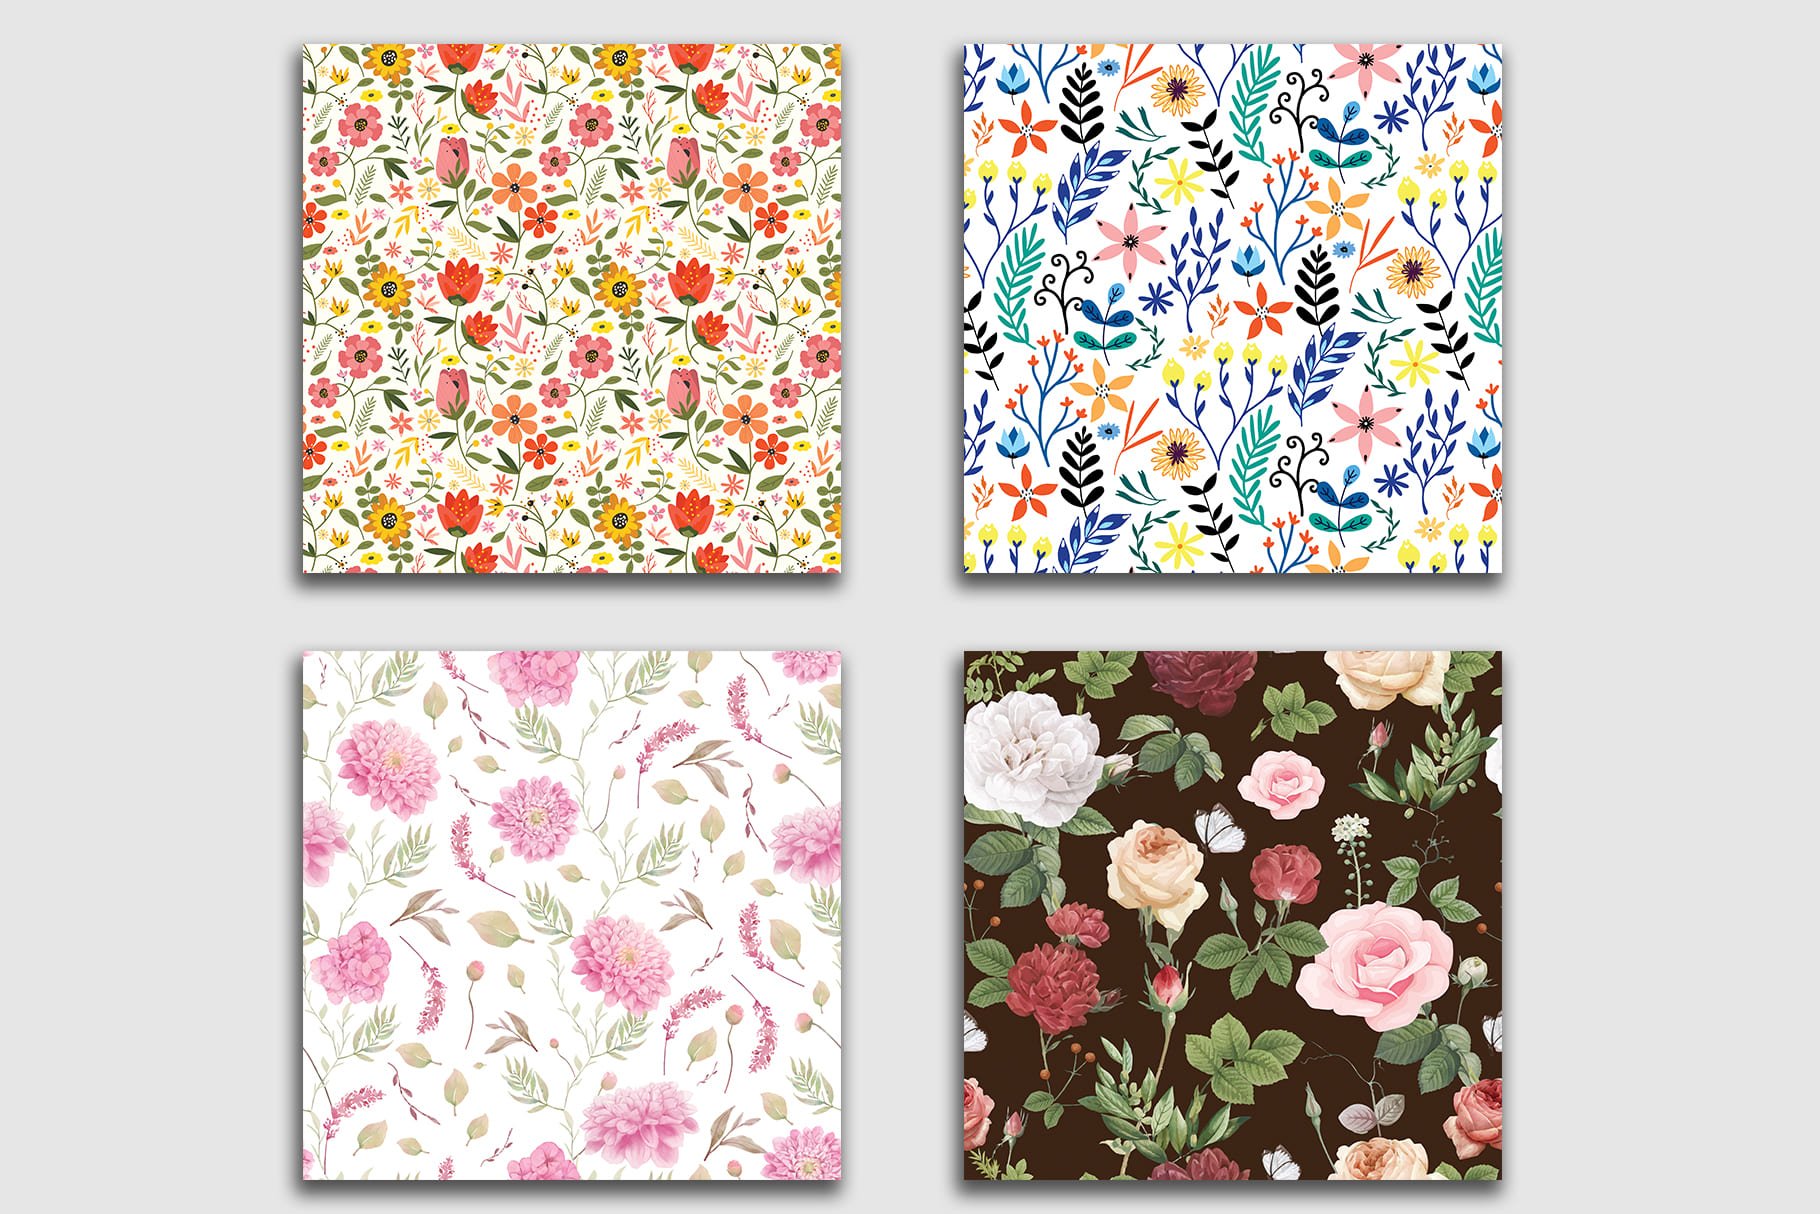 Square tiles in different moderate colors with different types of flowers.